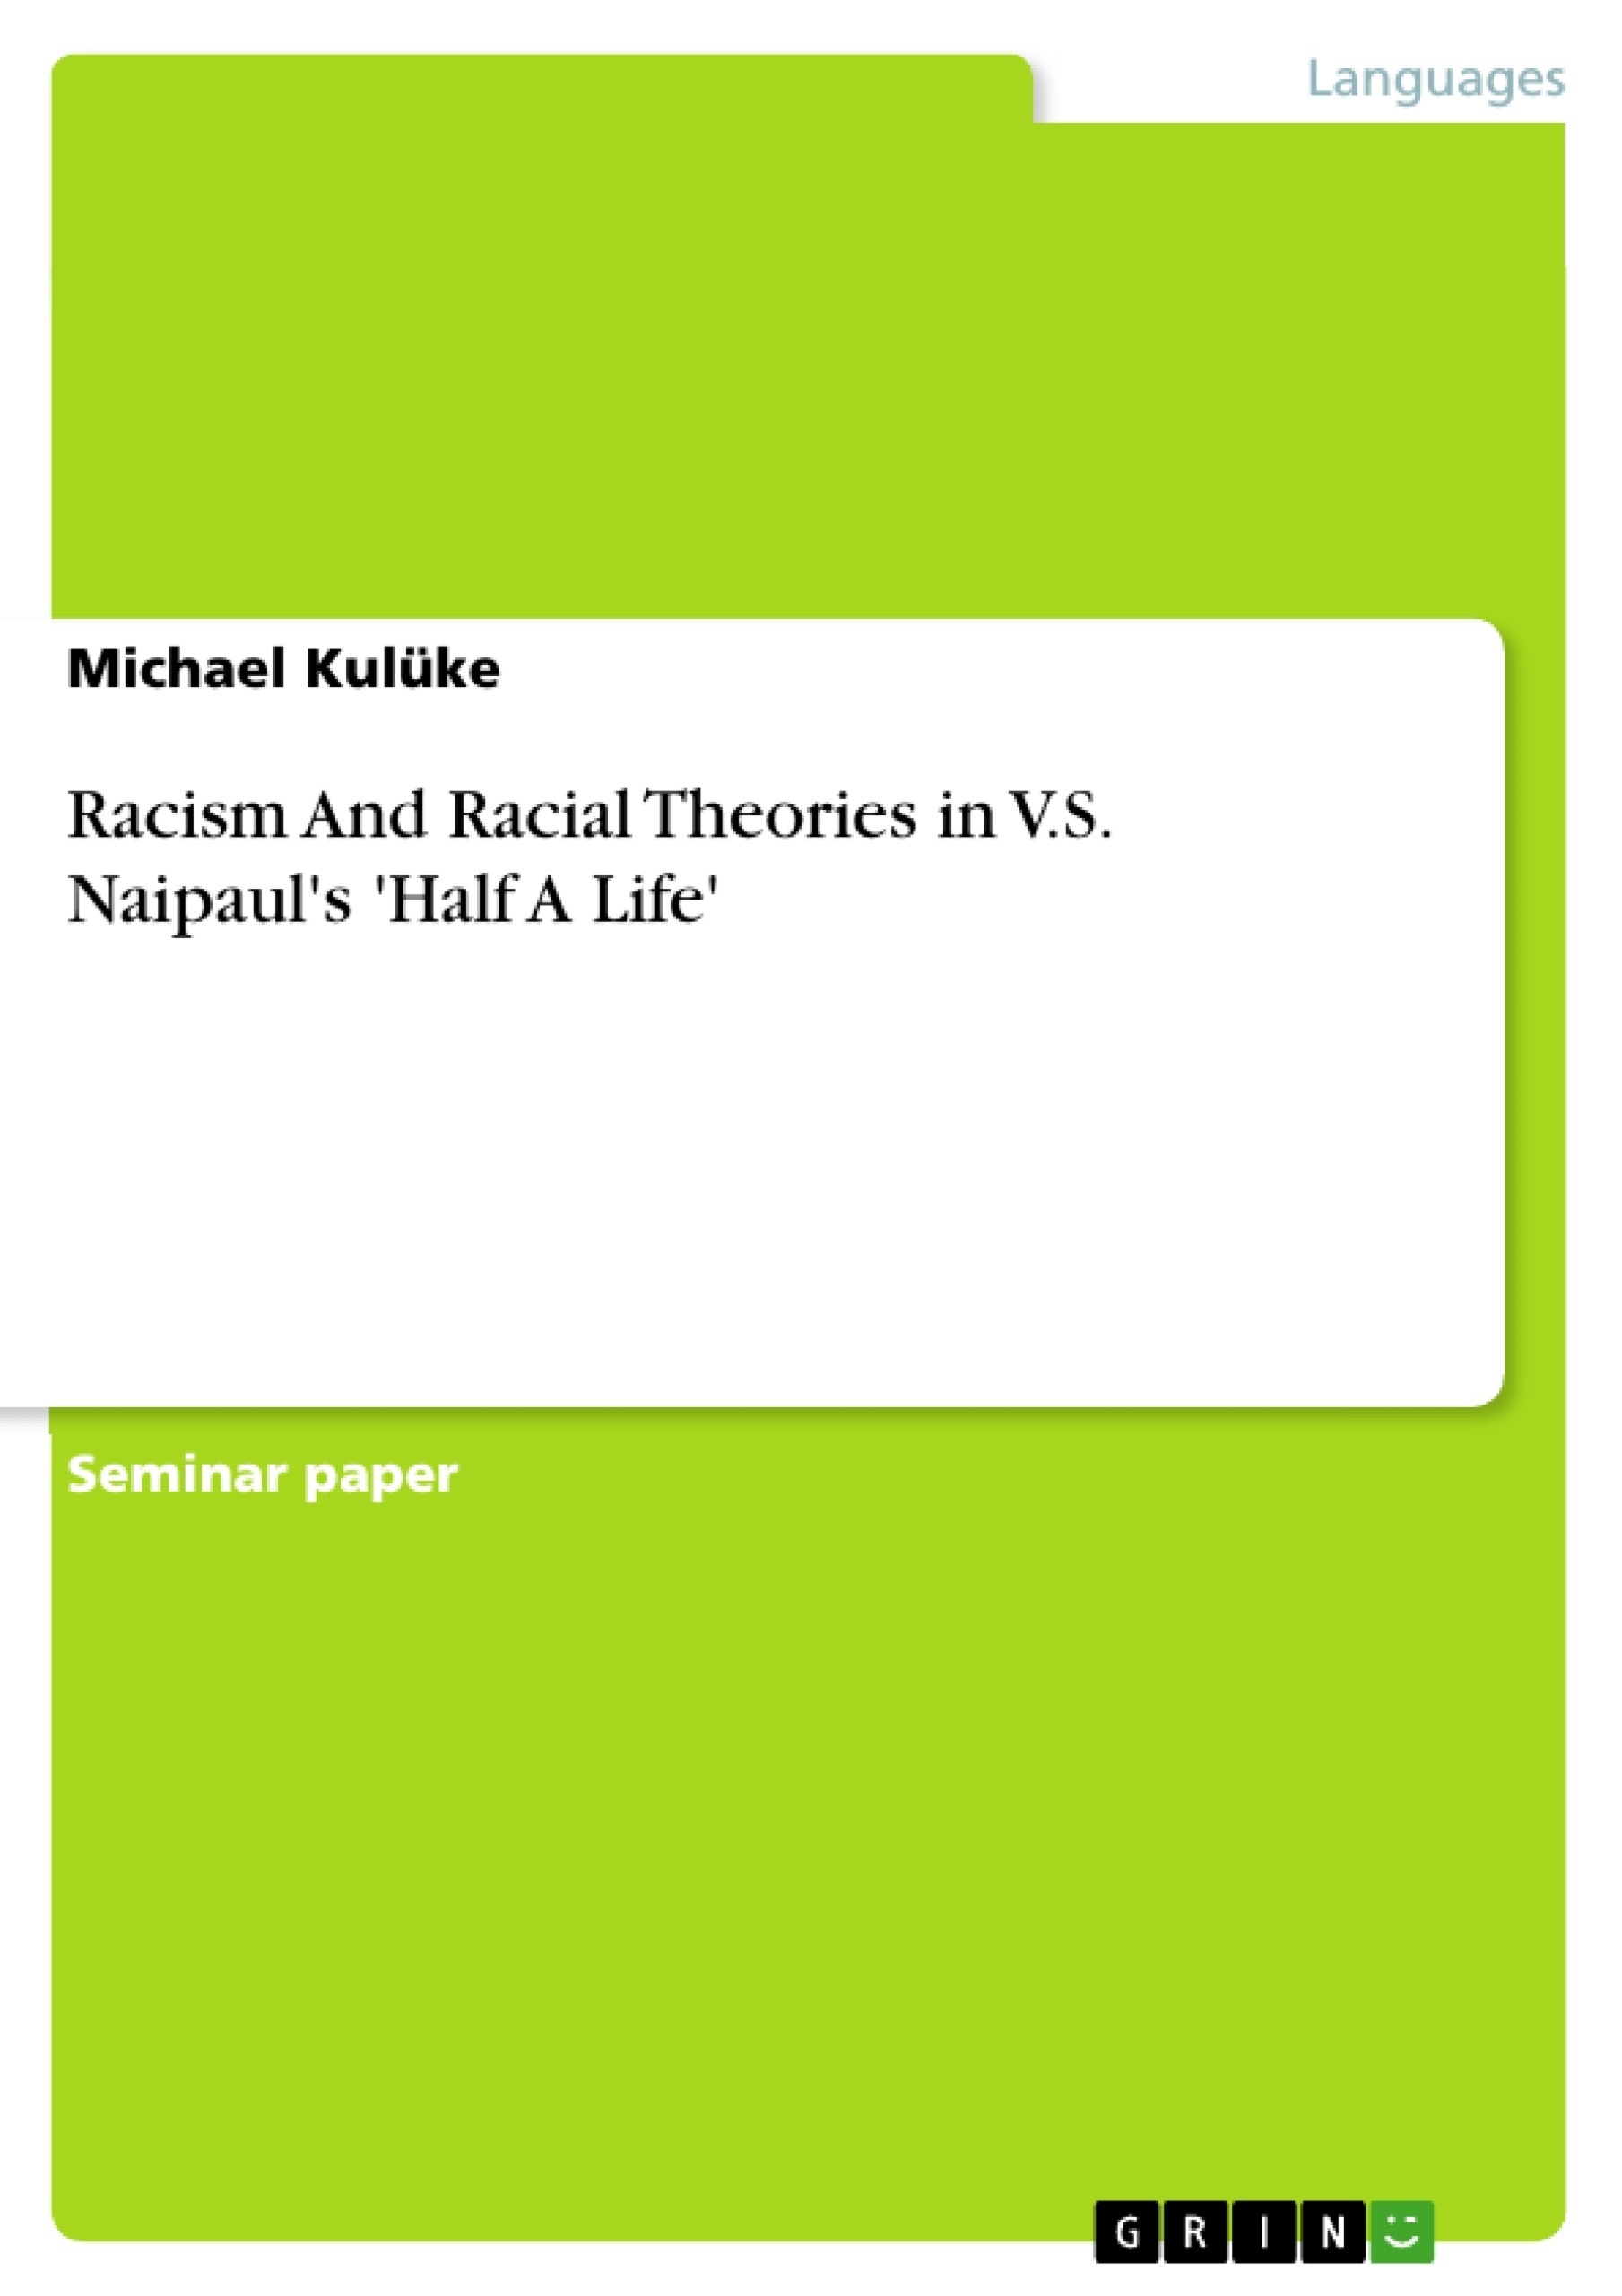 Titel: Racism And Racial Theories in V.S. Naipaul's 'Half A Life'